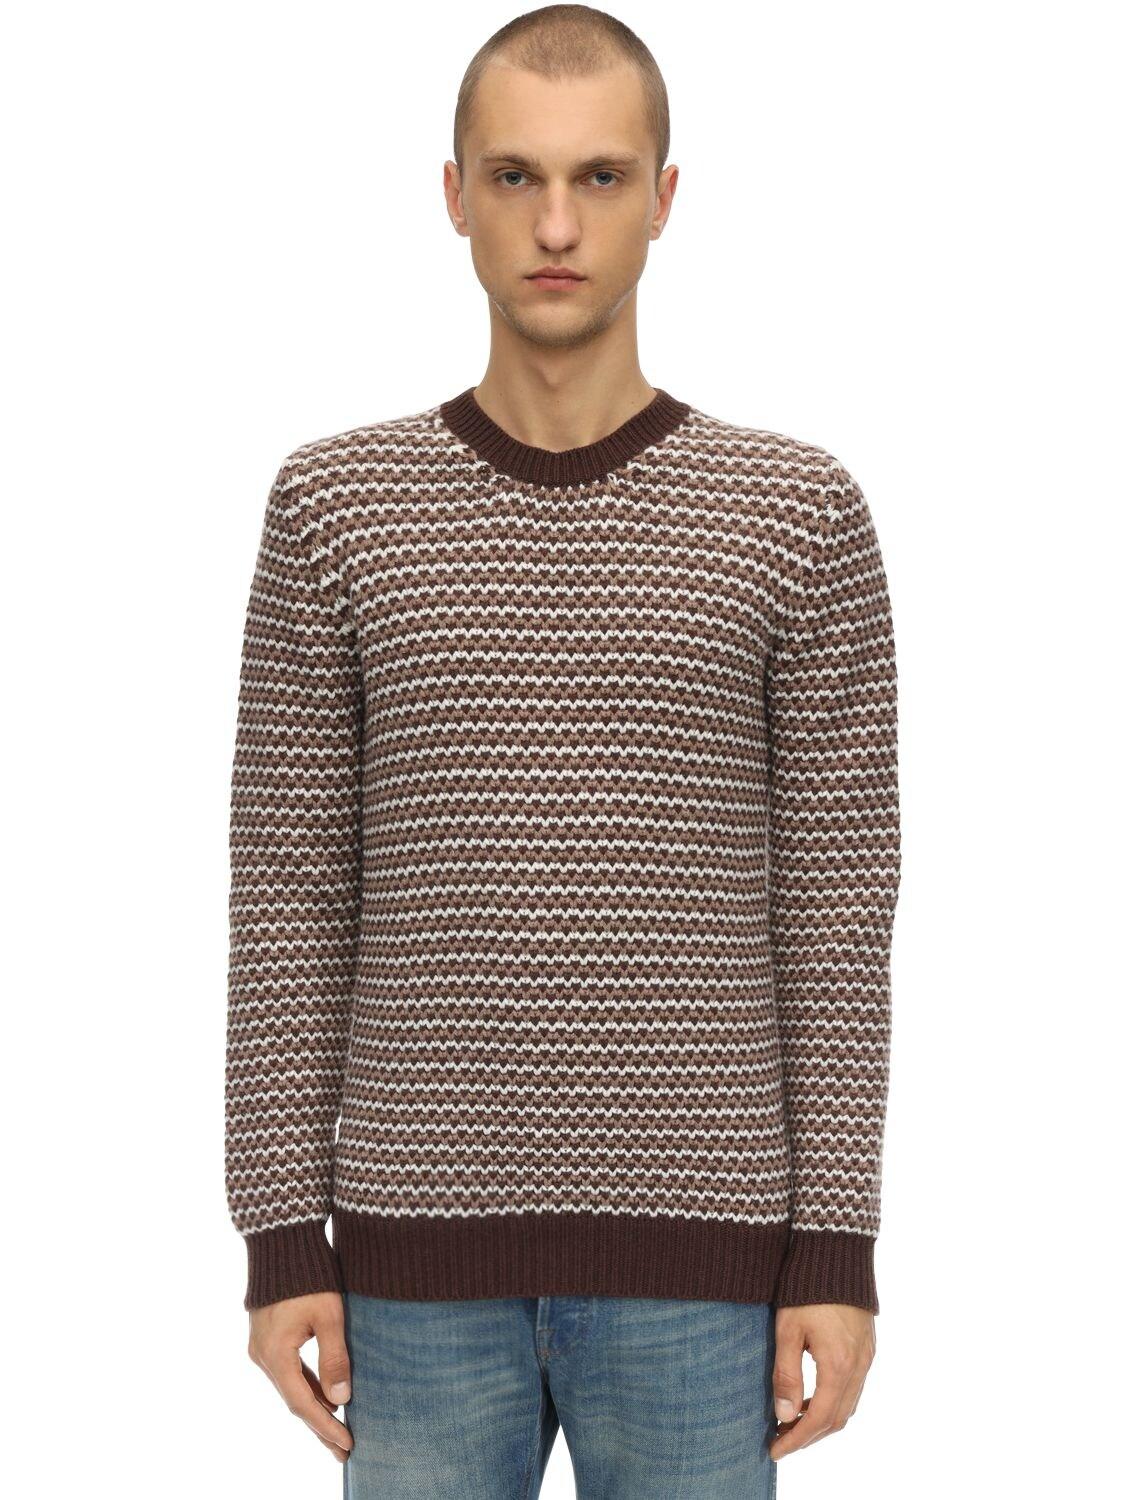 Piacenza Cashmere Dots Cashmere Knit Sweater in Brown for Men - Lyst